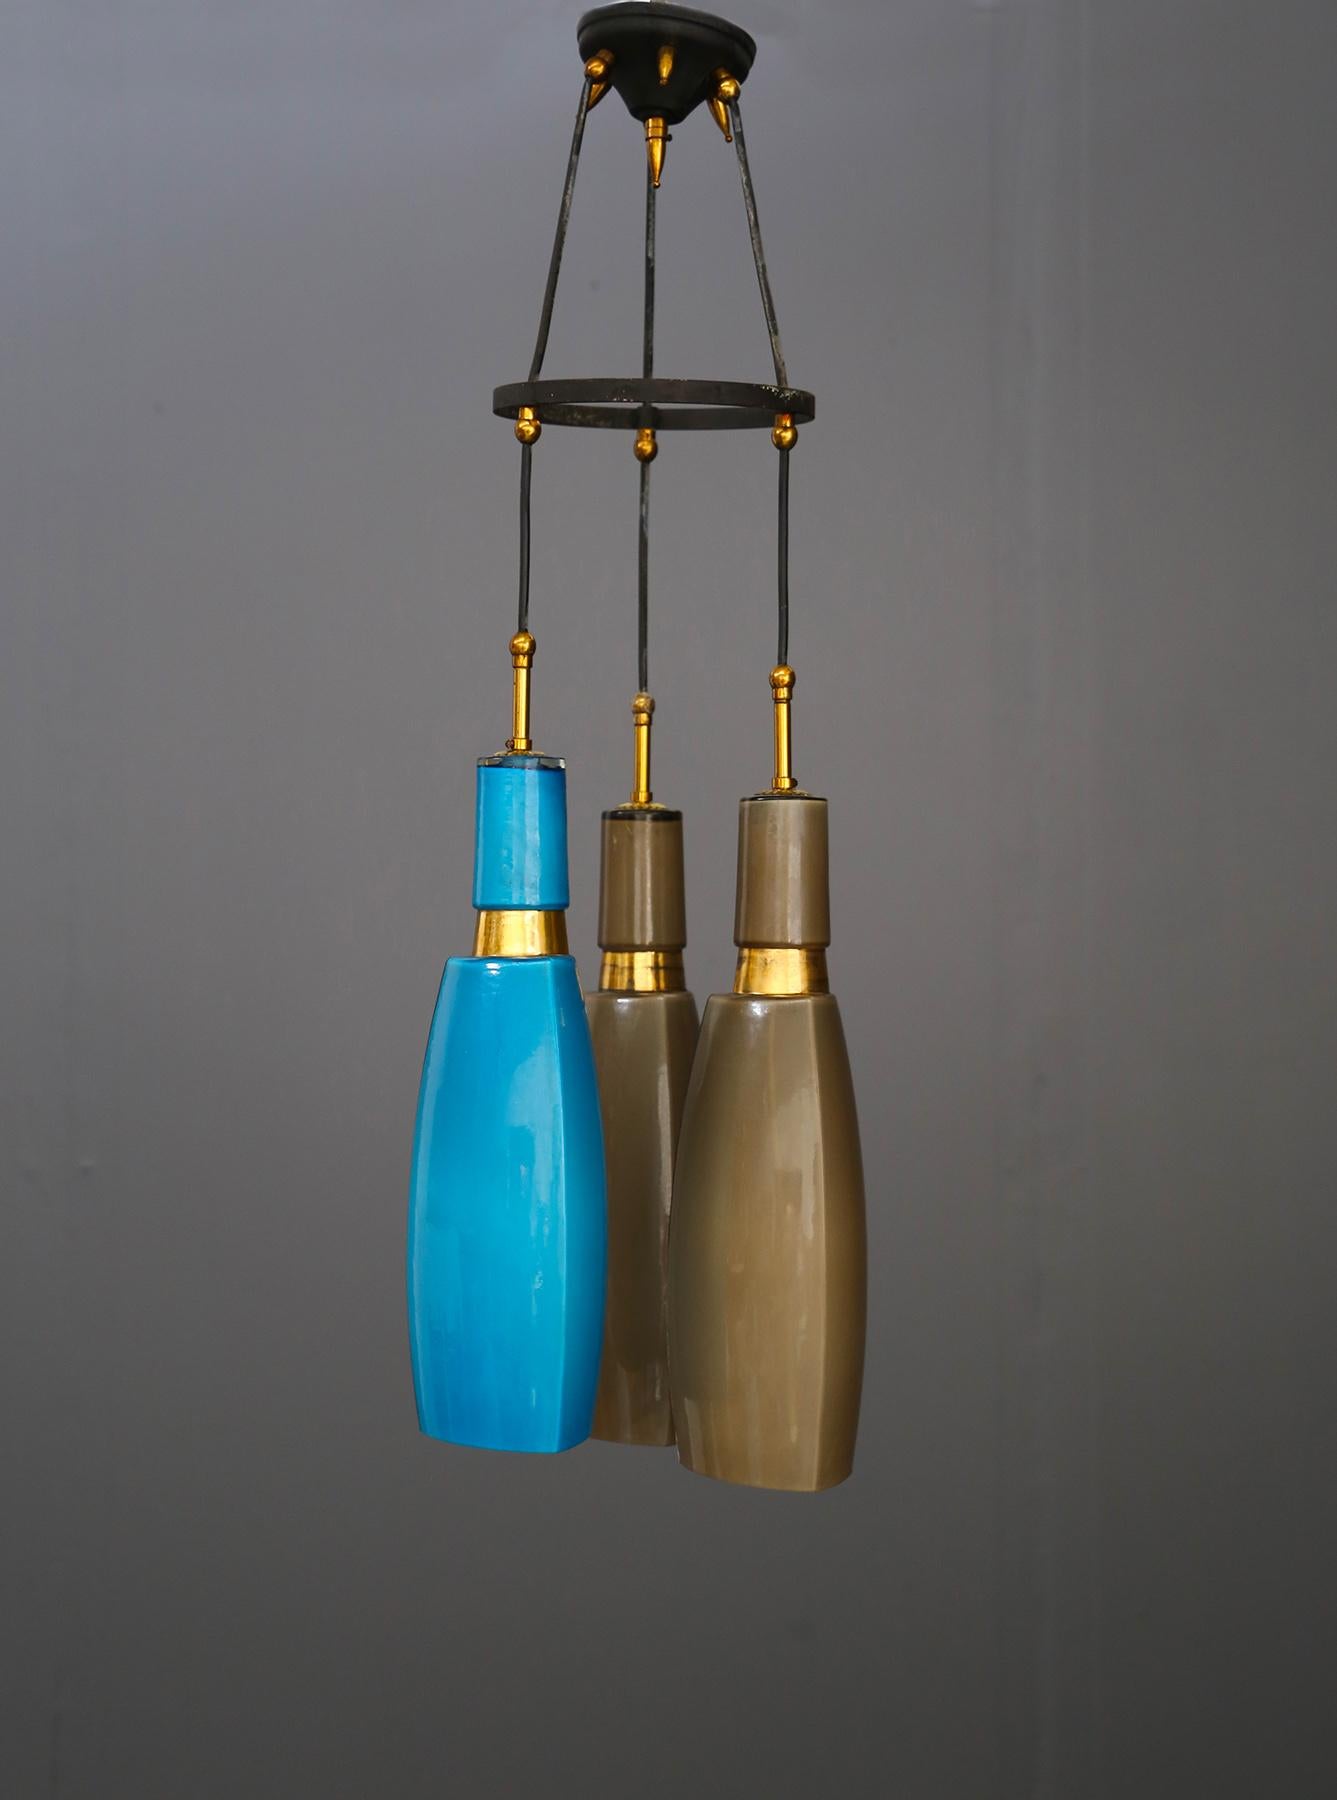 1950s pendant by Vistosi in colored opaline glass. The pendant has 3 lights. The structure that supports the lamp holders is made of painted iron with ornamental elements in chrome-plated brass. The various connecting elements are also in brass. The